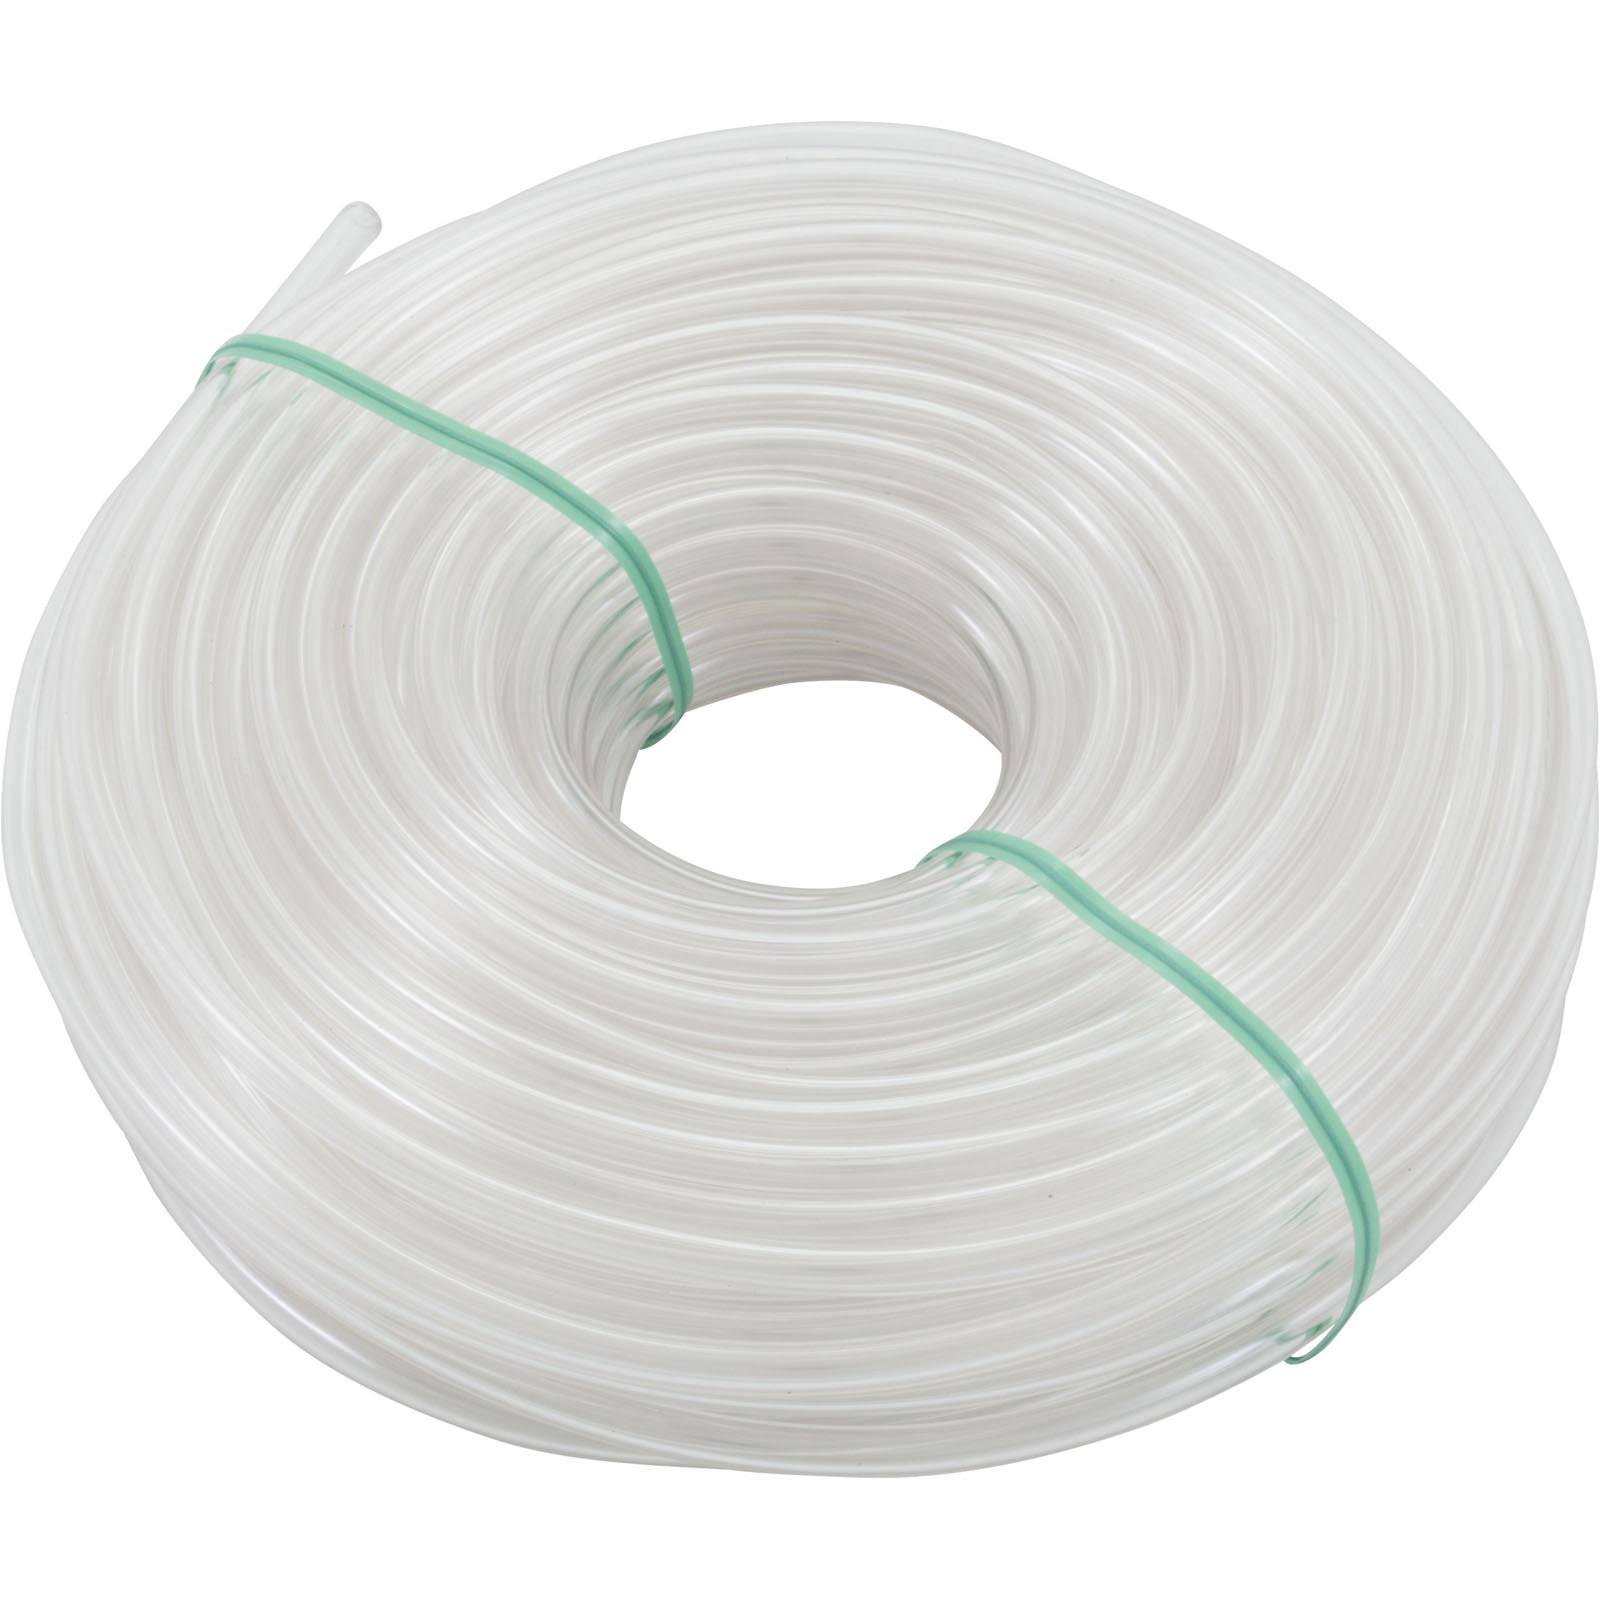 Picture of Air Tubing, 1/8"ID x 1/4"OD, 100 foot Roll